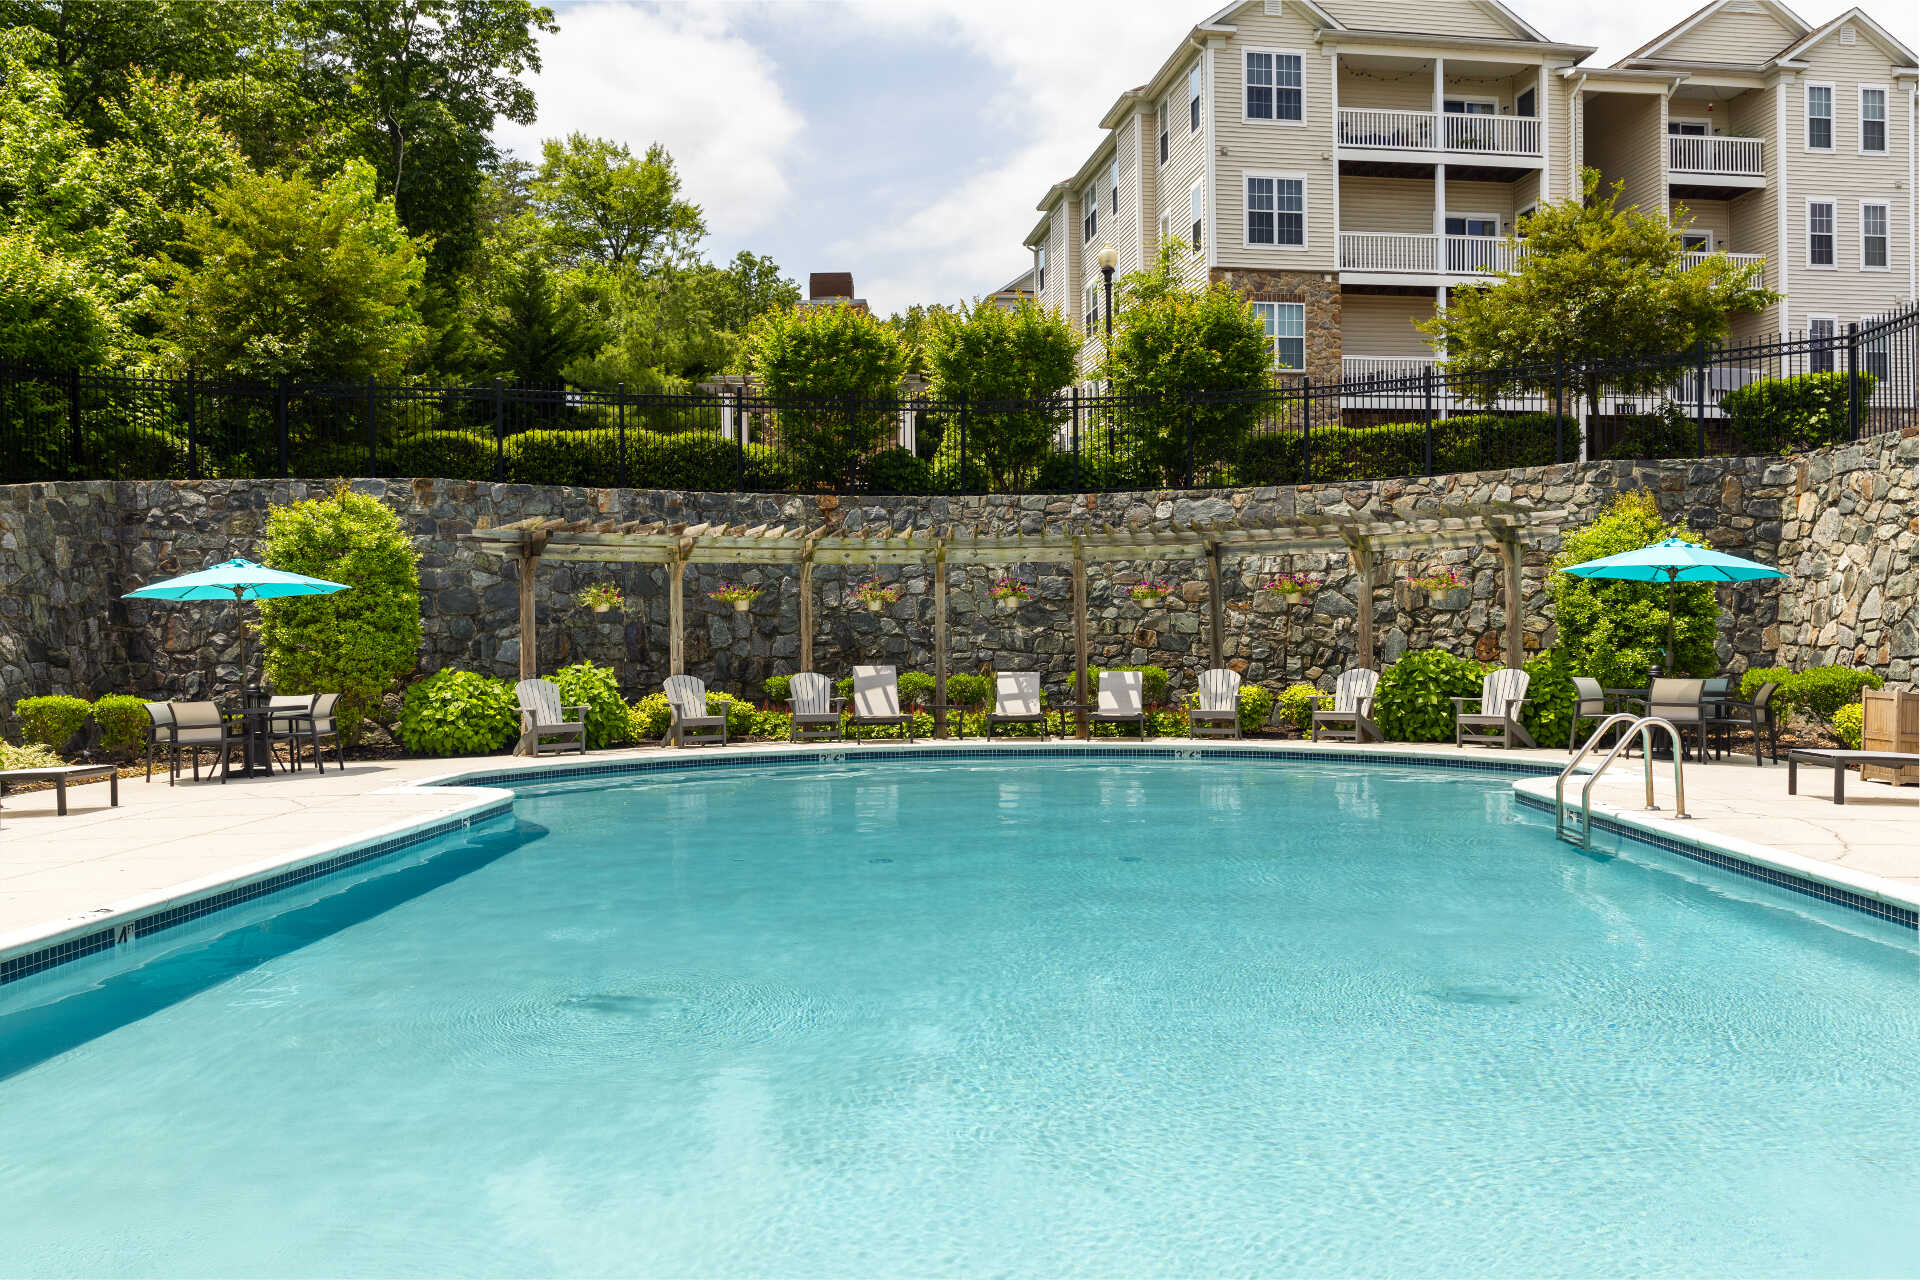 Chesapeake Ridge : When it gets warm, the pool is the perfect place to get cool.